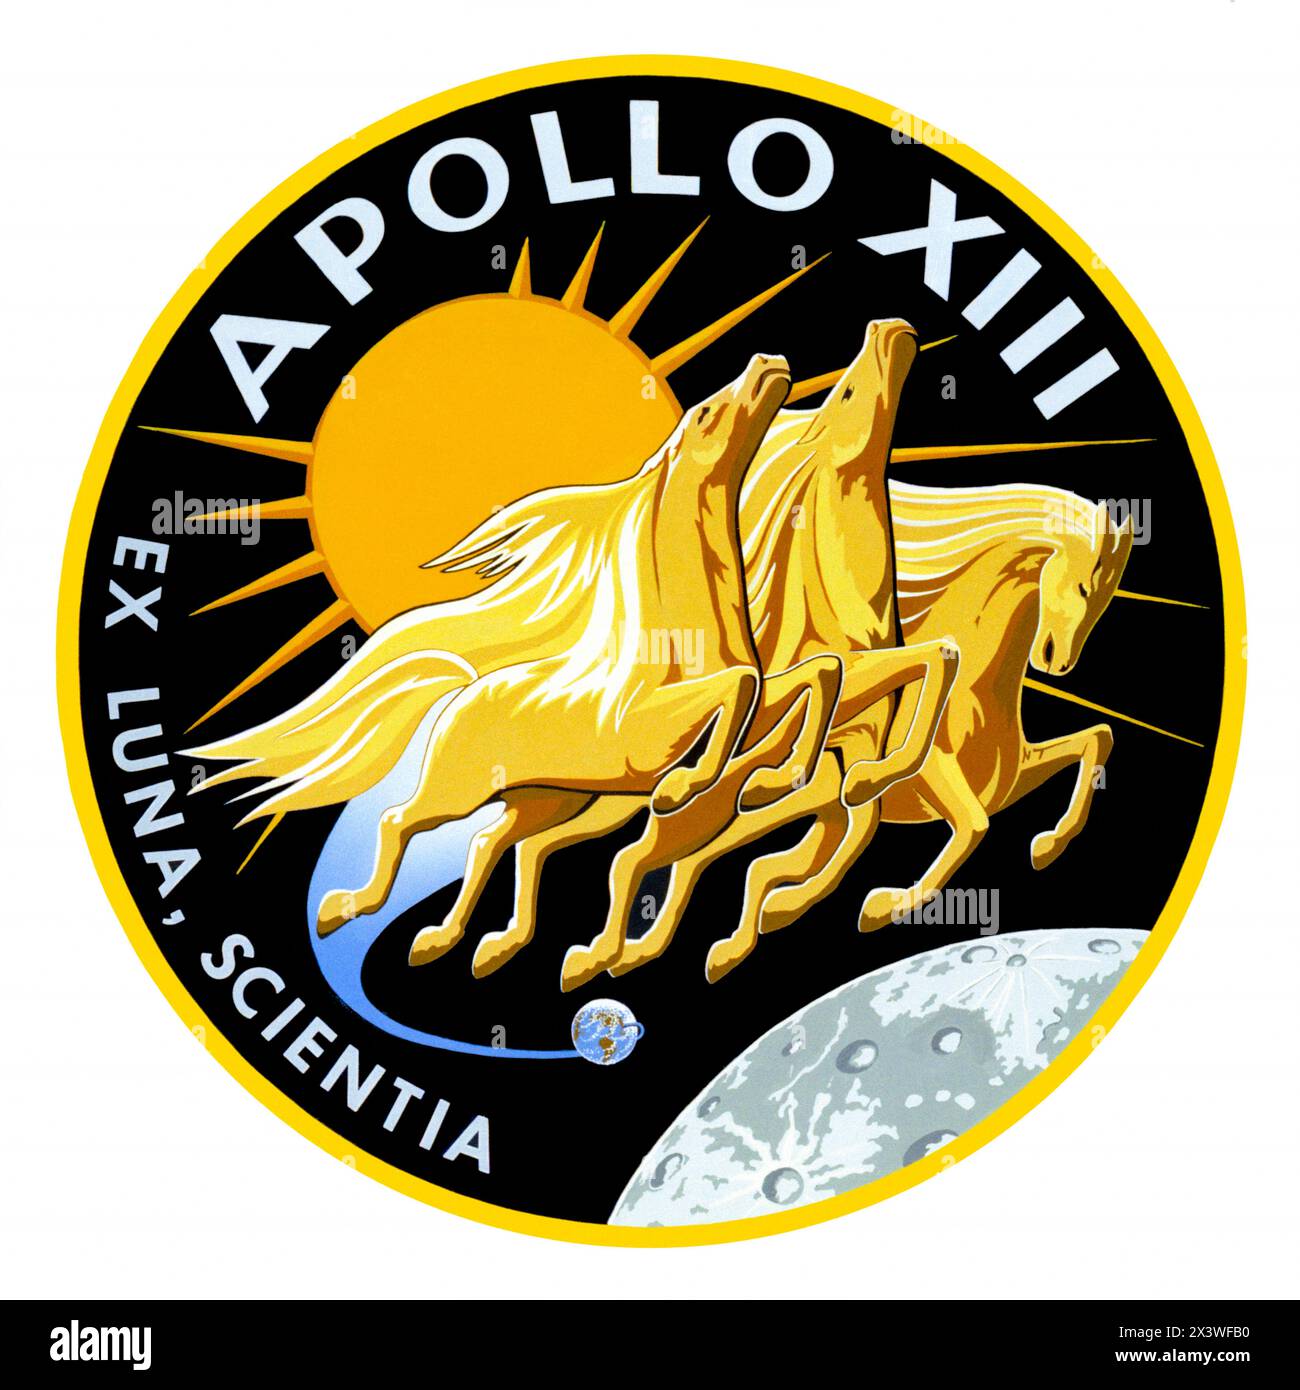 Apollo 13 lunar landing mission 1969 insignia showing Apollo, the sun god of Greek mythology, and the Latin phrase “Ex Luna, Scientia” which means 'From the Moon, Knowledge.' Stock Photo